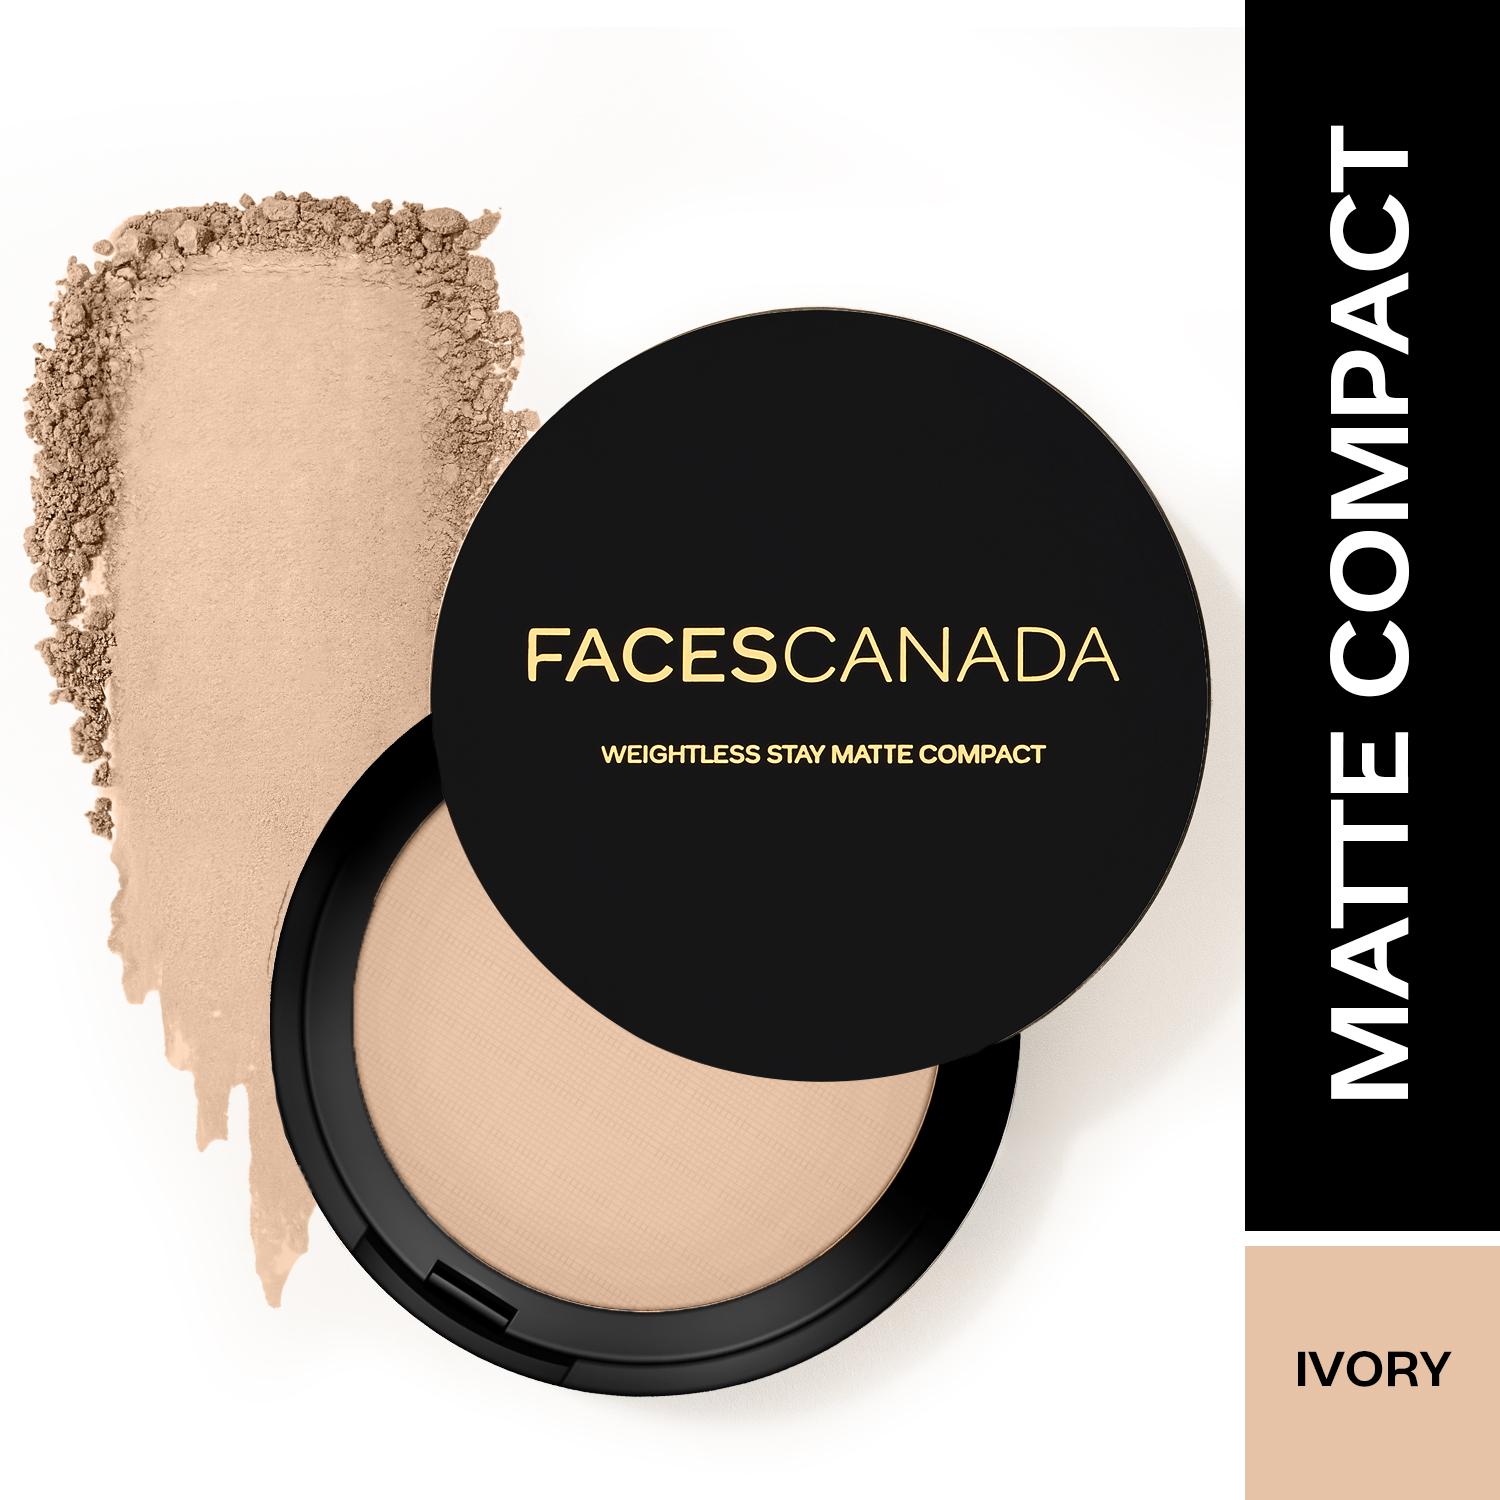 Faces Canada | Faces Canada Weightless Stay Matte Finish Compact Powder,Non Oily Matte Pressed Powder -Ivory (9 g)